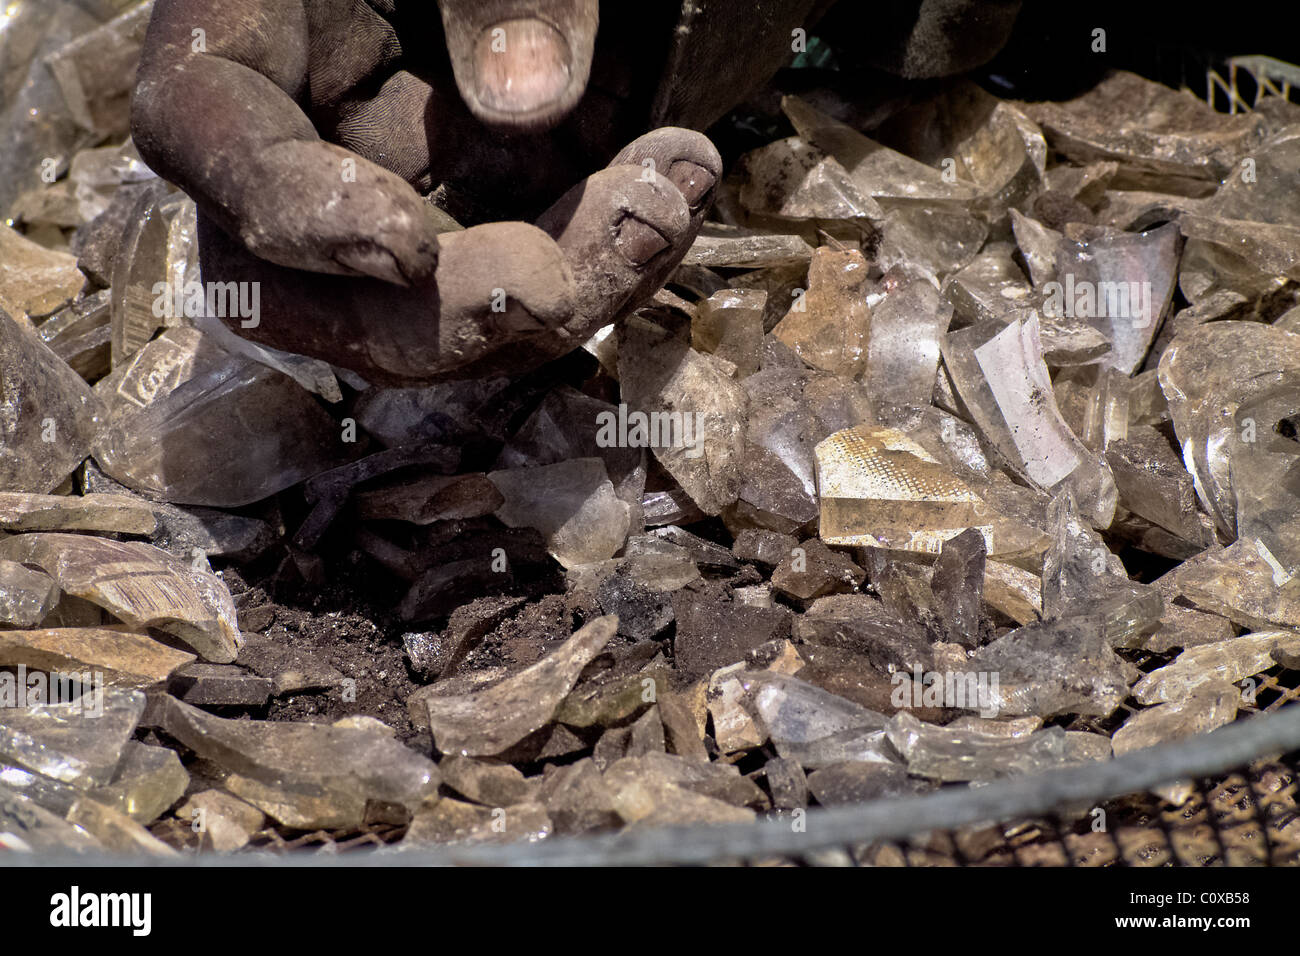 A Nicaraguan man recollects glass cullets for recycling in the garbage dump La Chureca, Managua, Nicaragua. Stock Photo